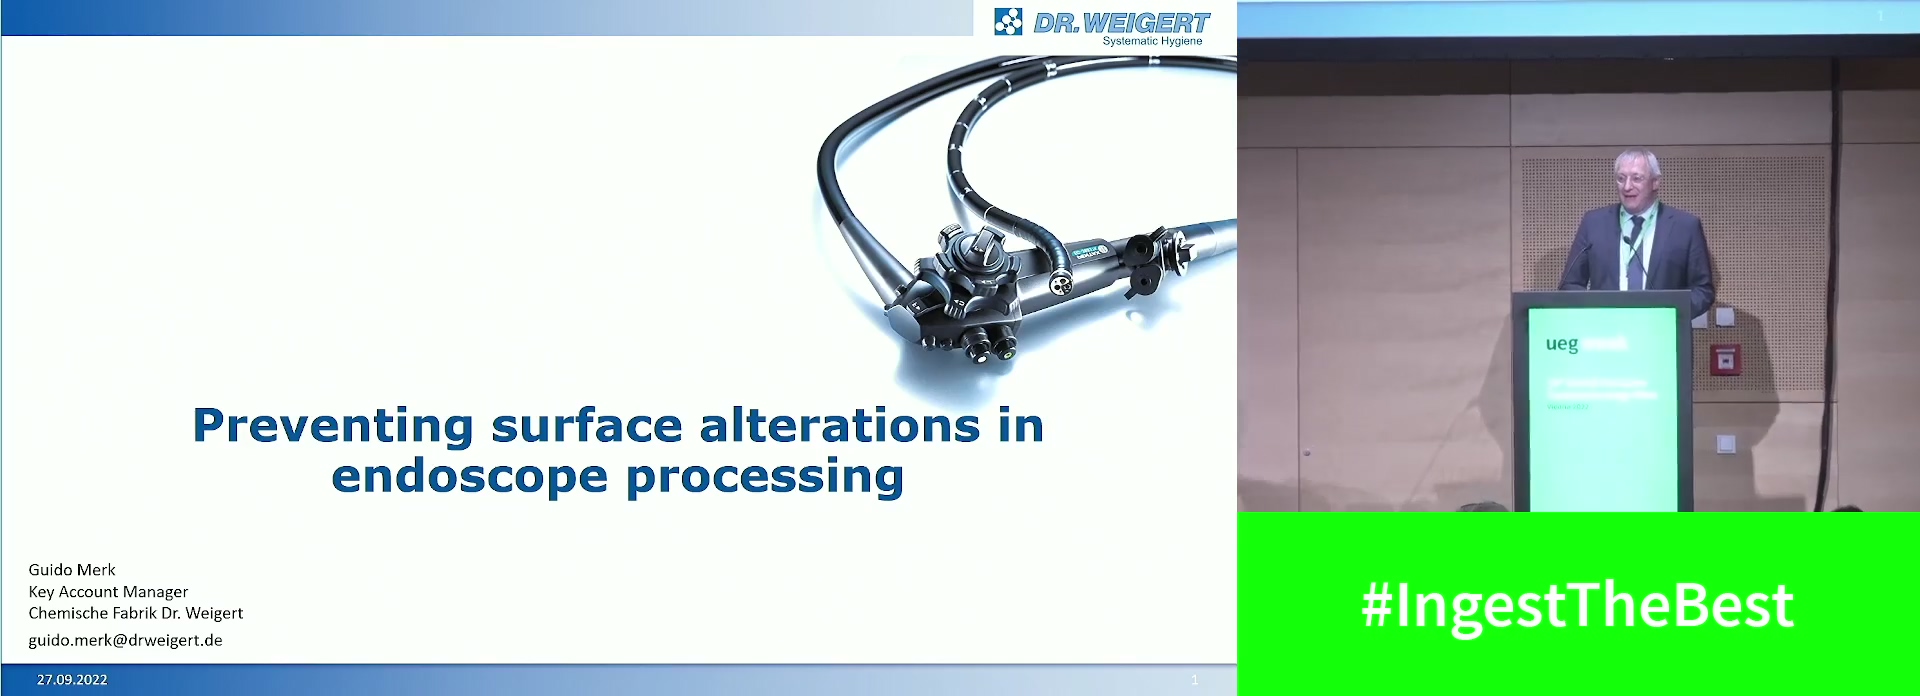 Preventing surface alterations in endoscope reprocessing